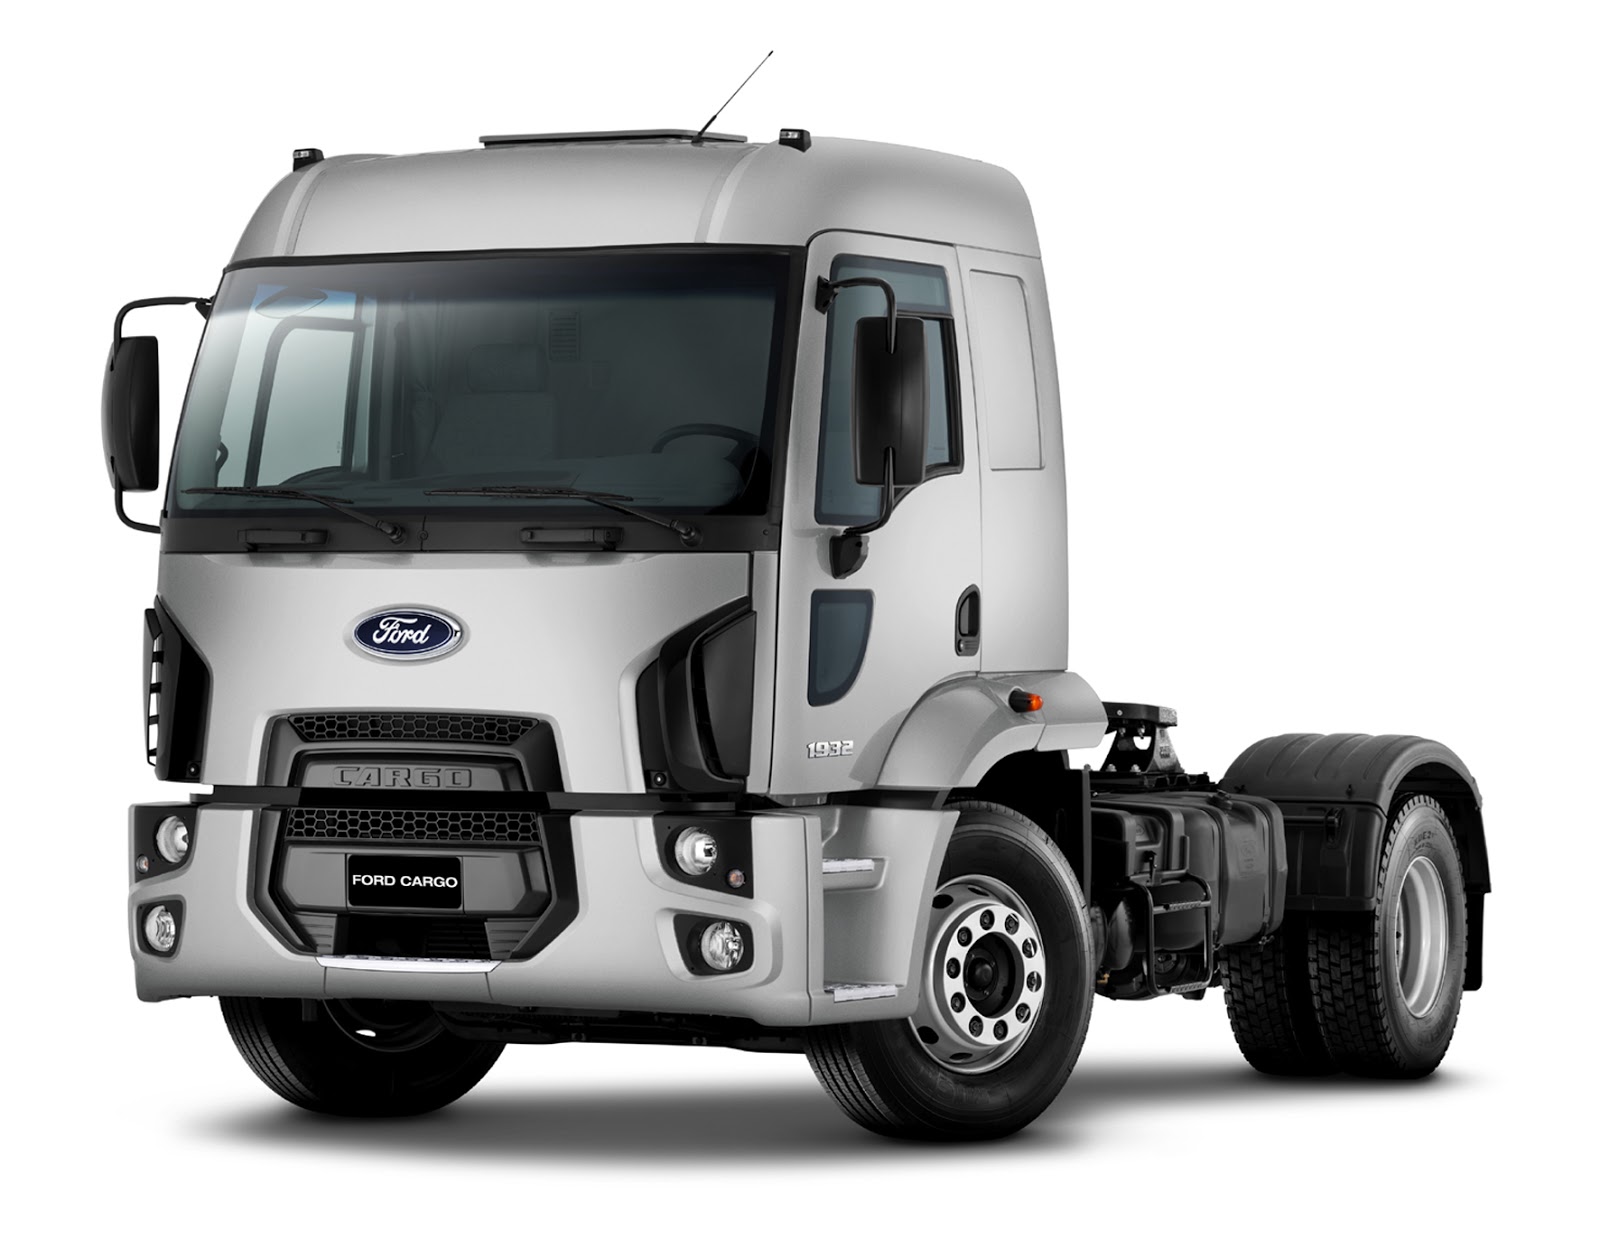 Ford cargo 2013 photo - 4